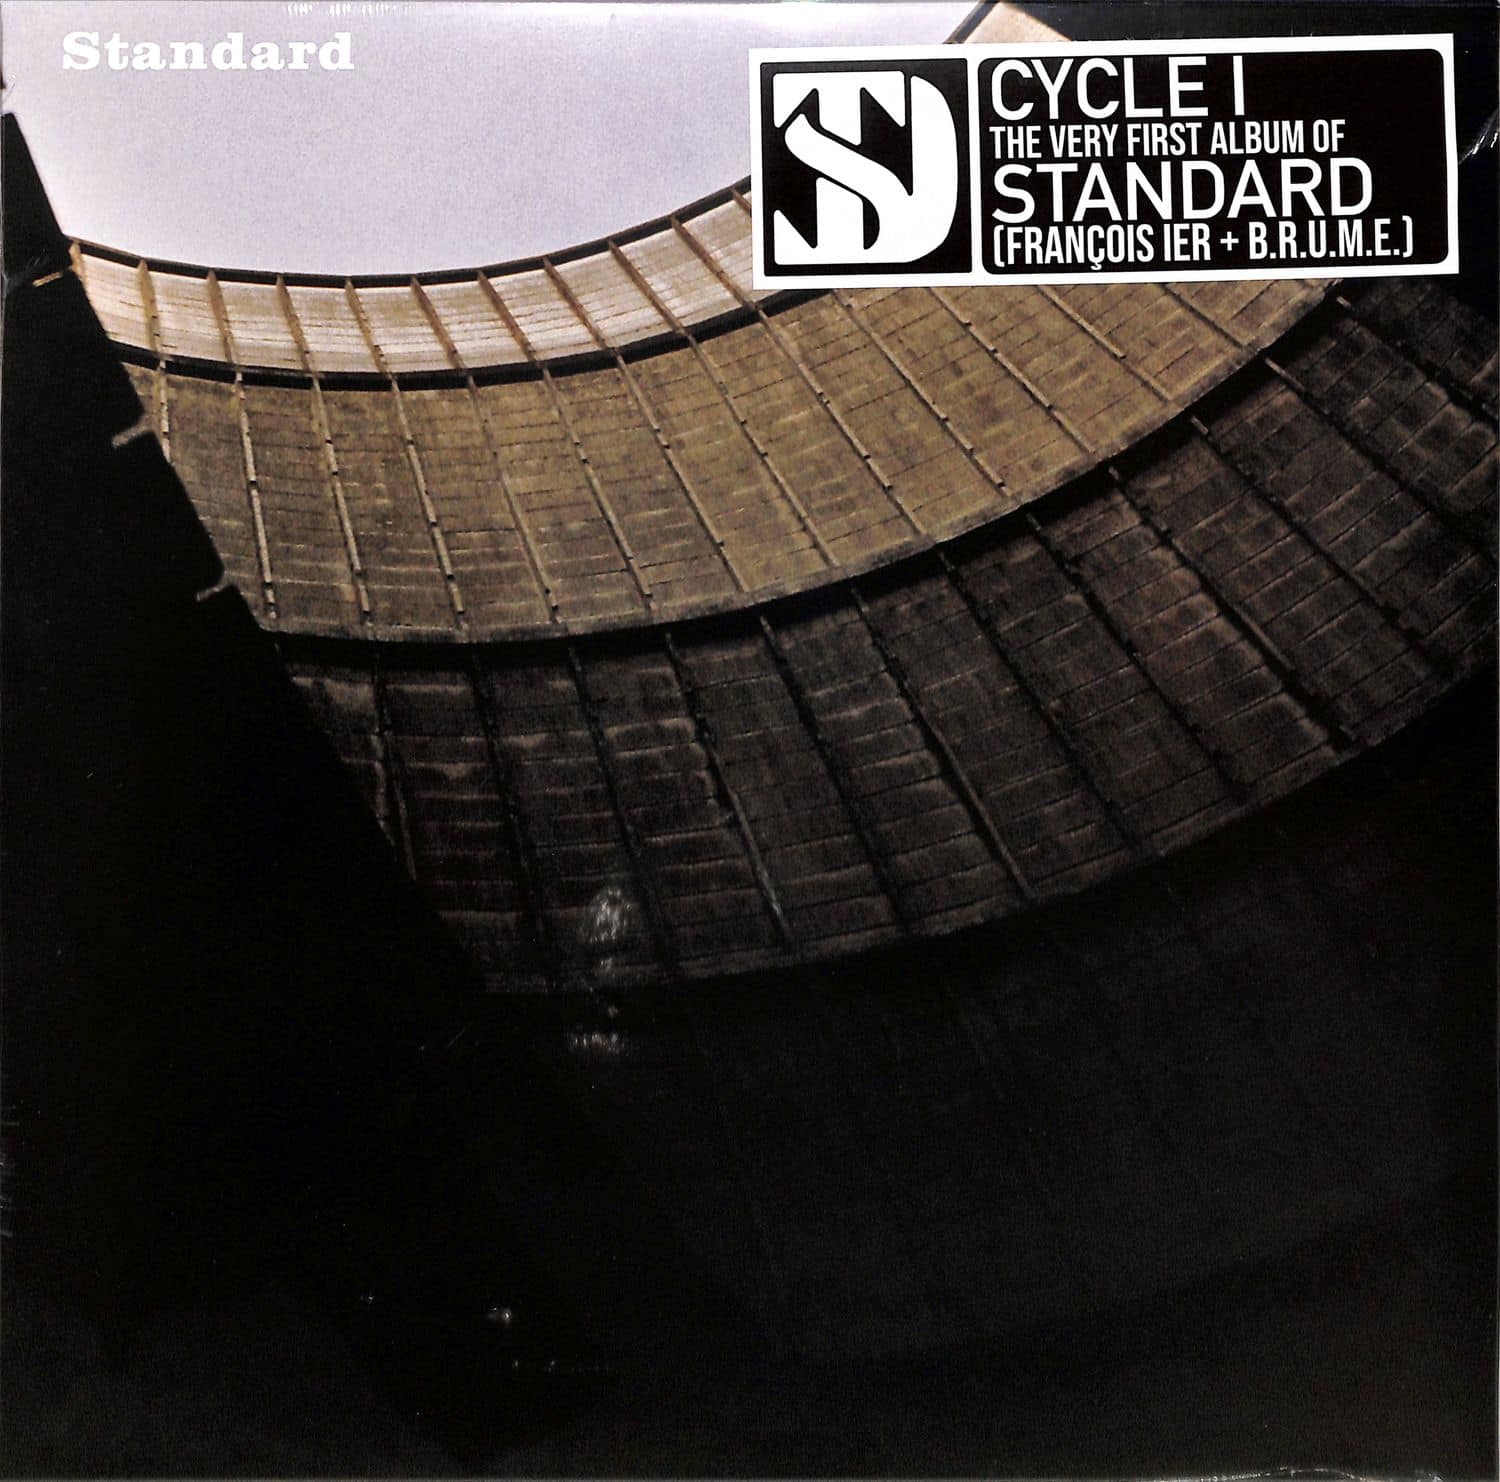 Standard - CYCLE 1